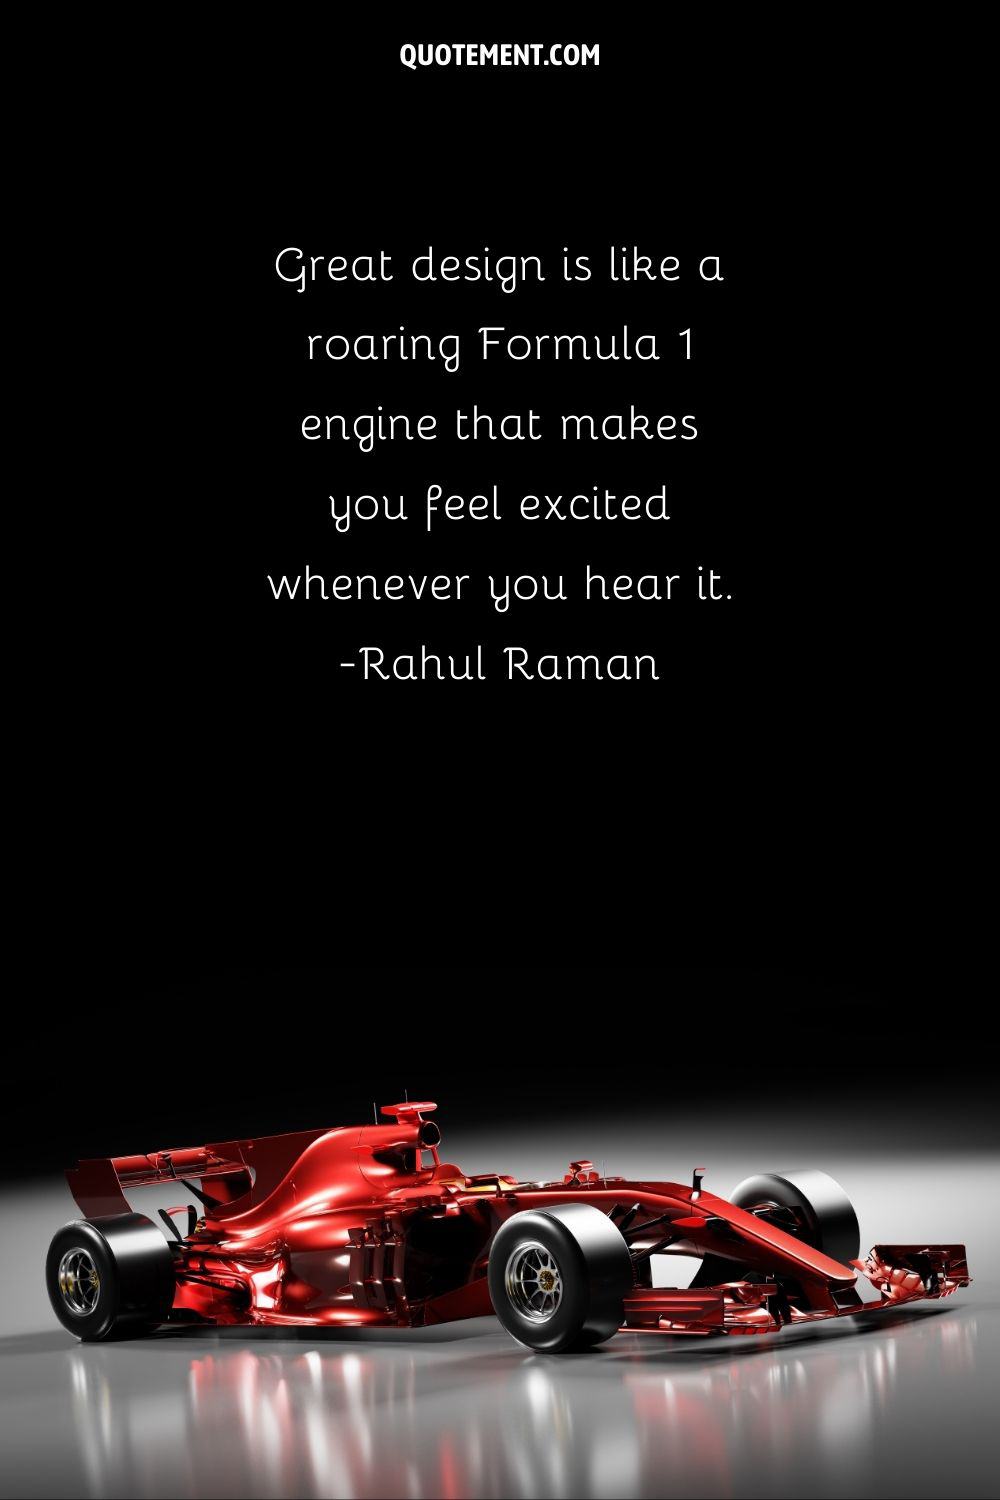 “Great design is like a roaring Formula 1 engine that makes you feel excited whenever you hear it.” ― Rahul Raman, Pixel Land